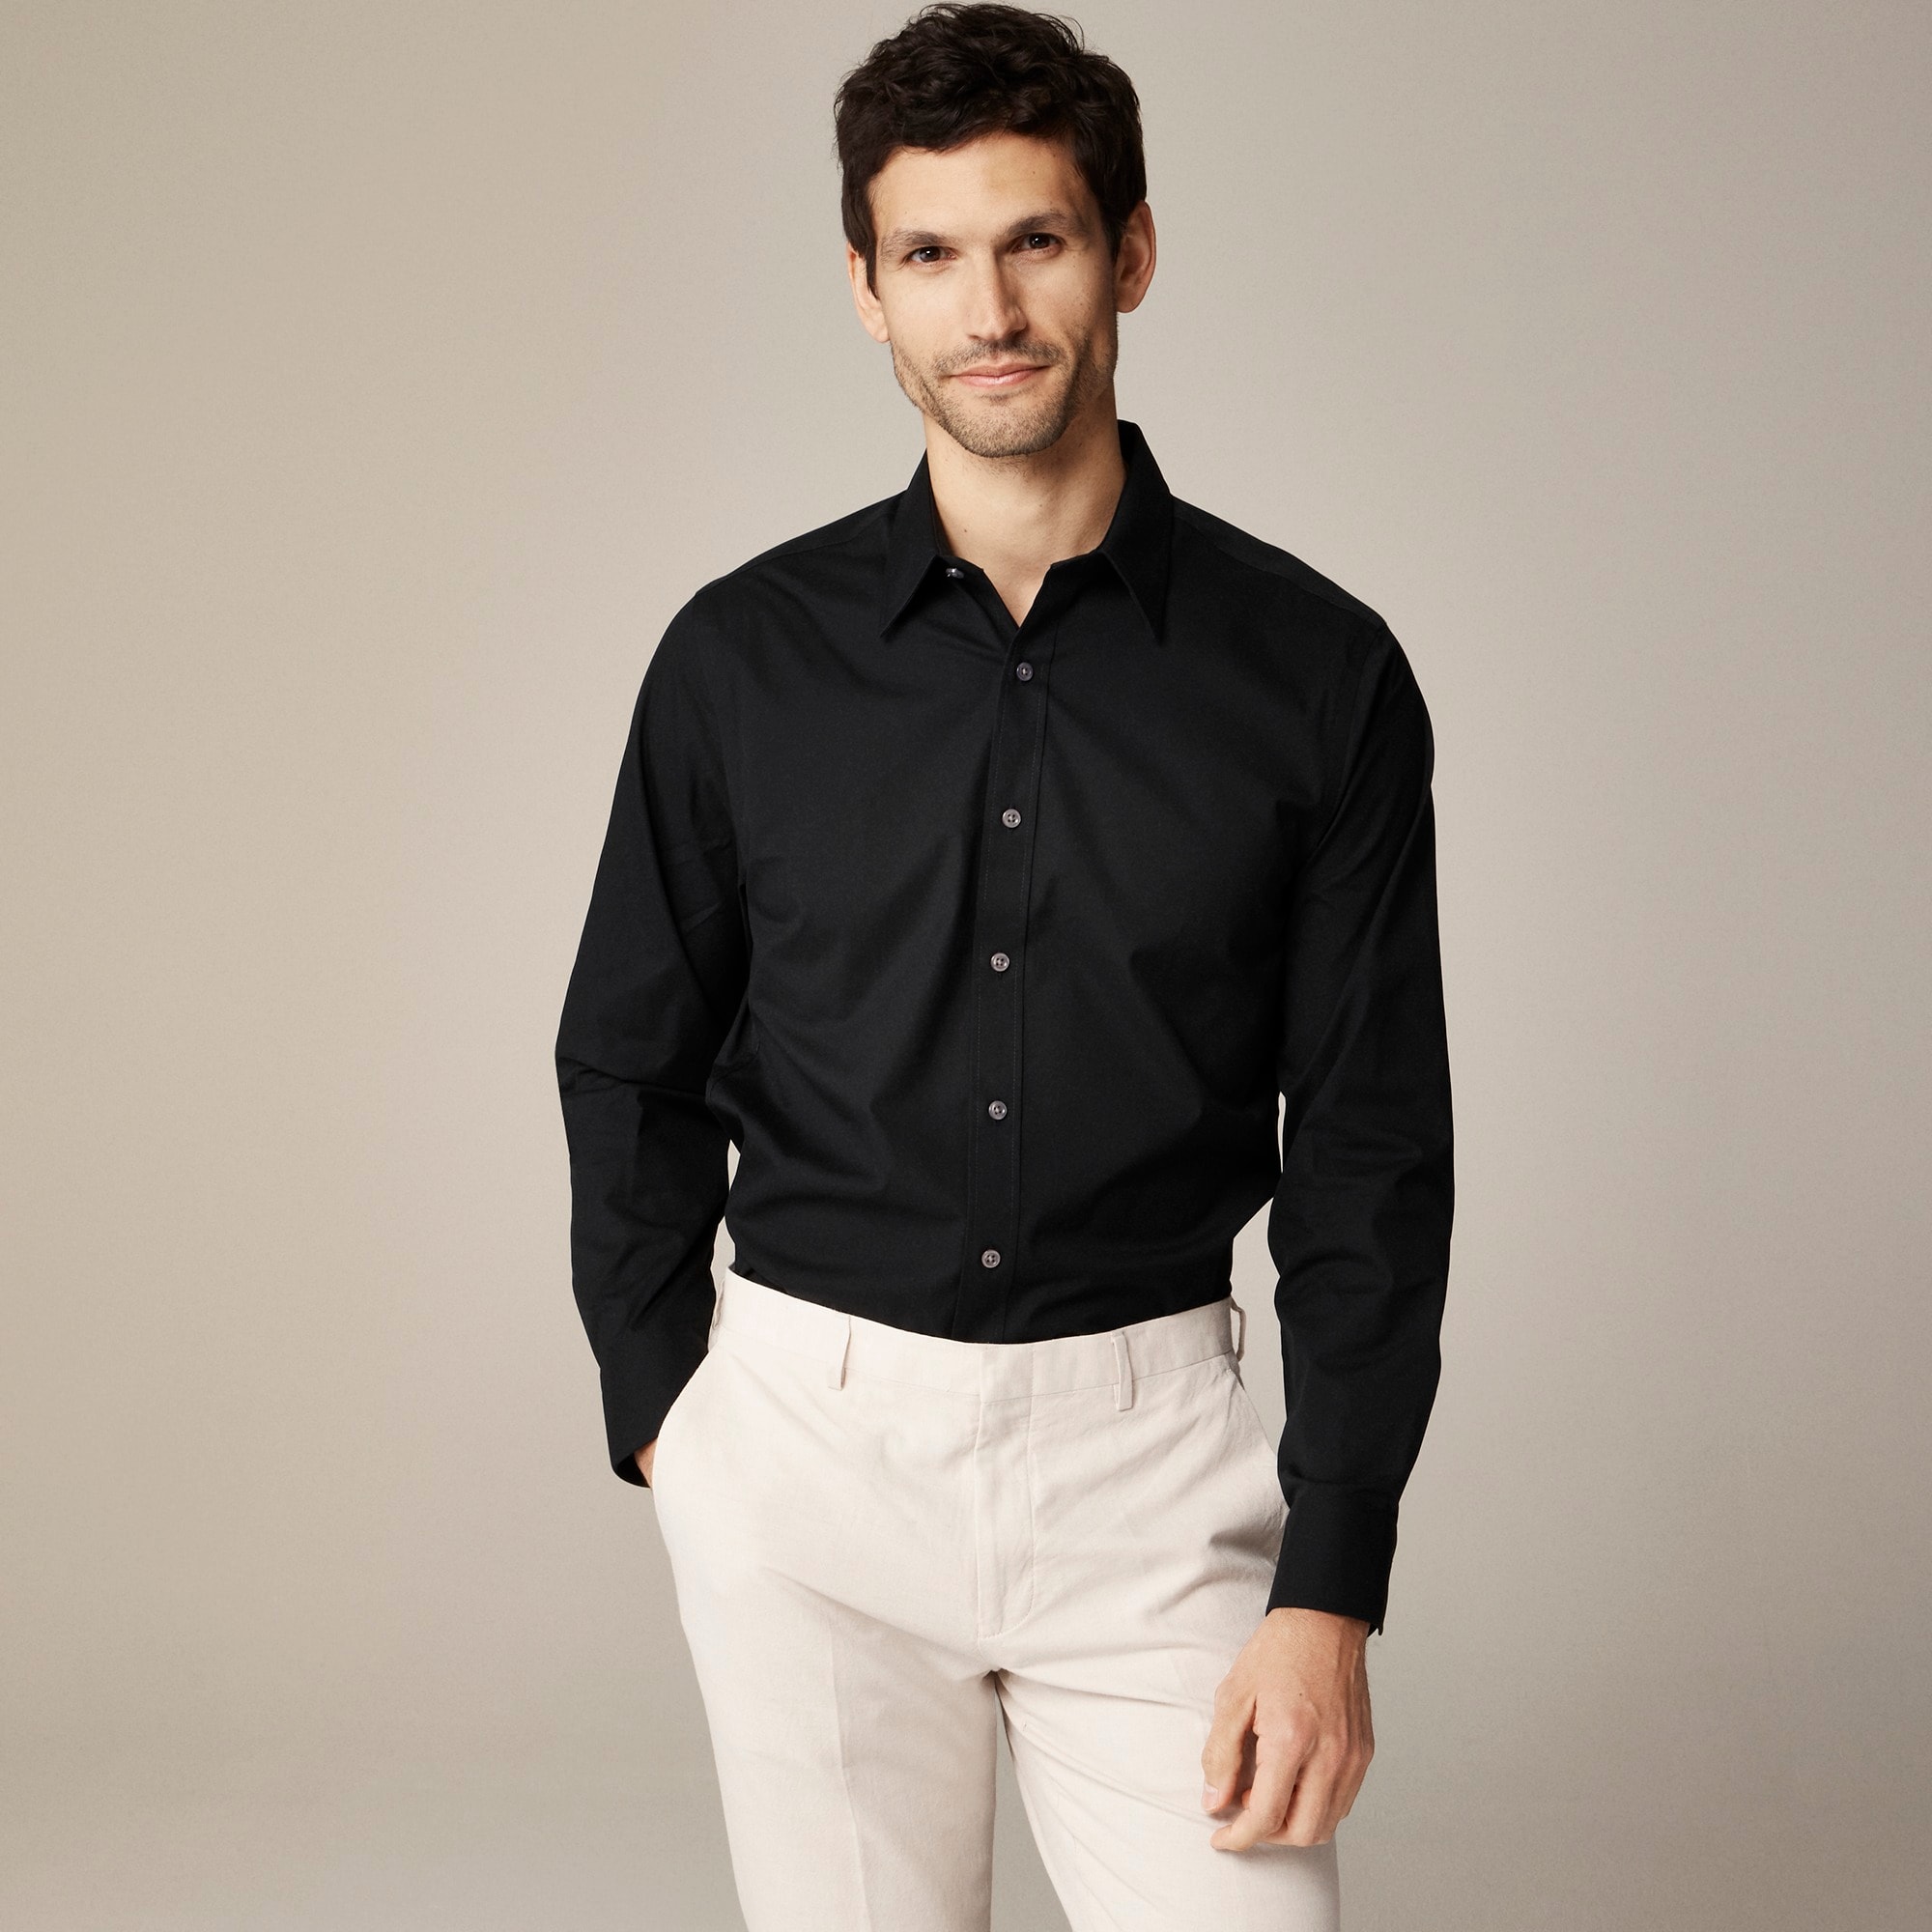 Jcrew Bowery wrinkle-free dress shirt with point collar